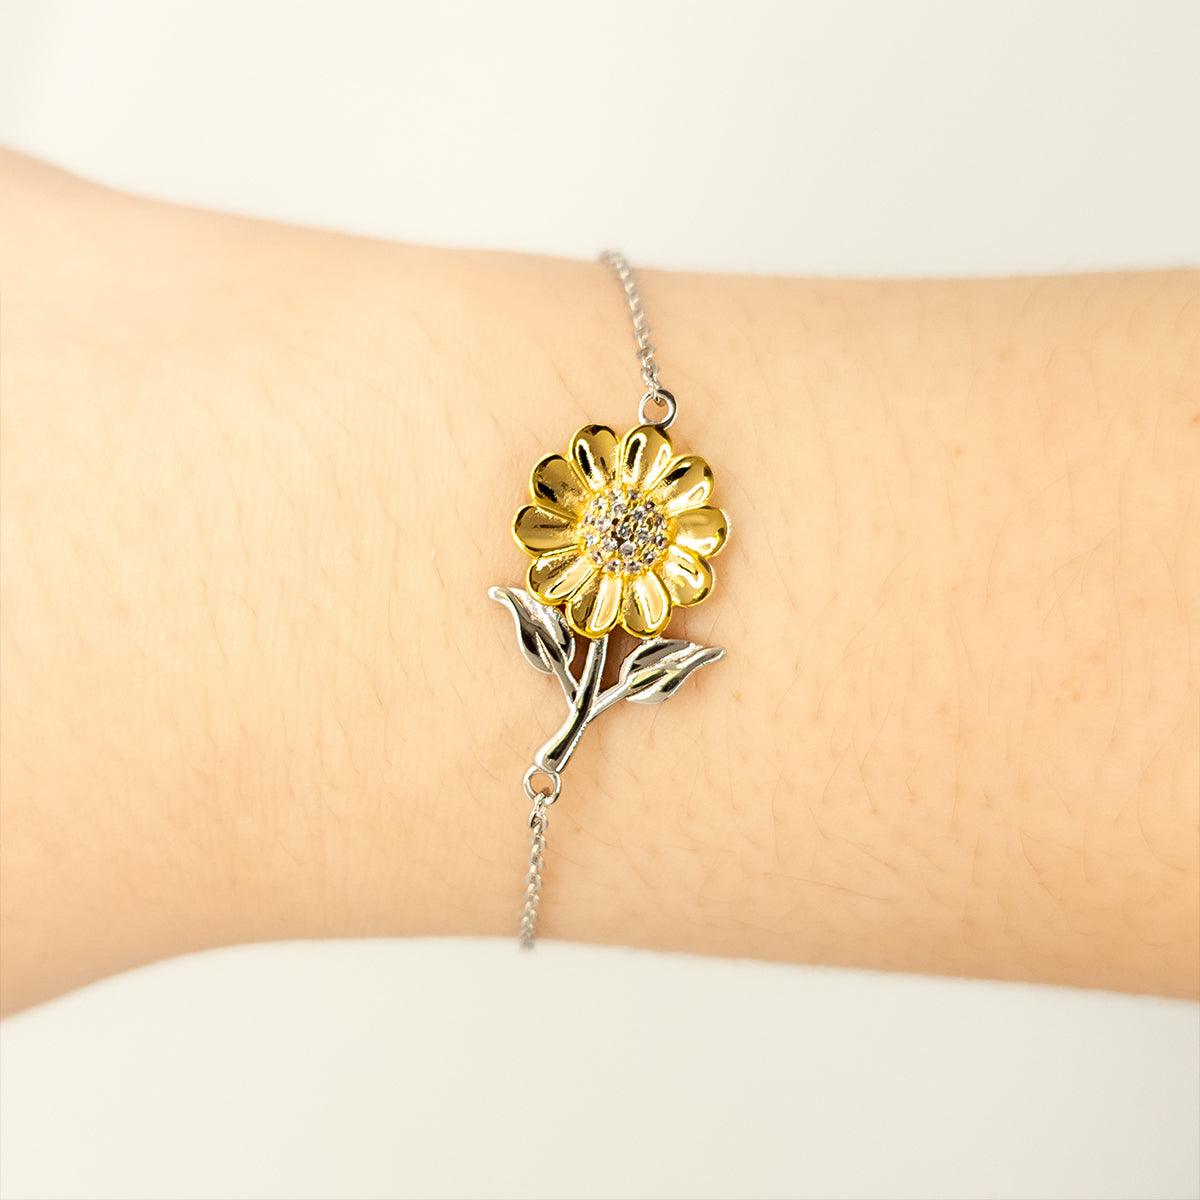 Mechanical Engineer Sunflower Bracelet - Thanks for being who you are - Birthday Christmas Jewelry Gifts Coworkers Colleague Boss - Mallard Moon Gift Shop